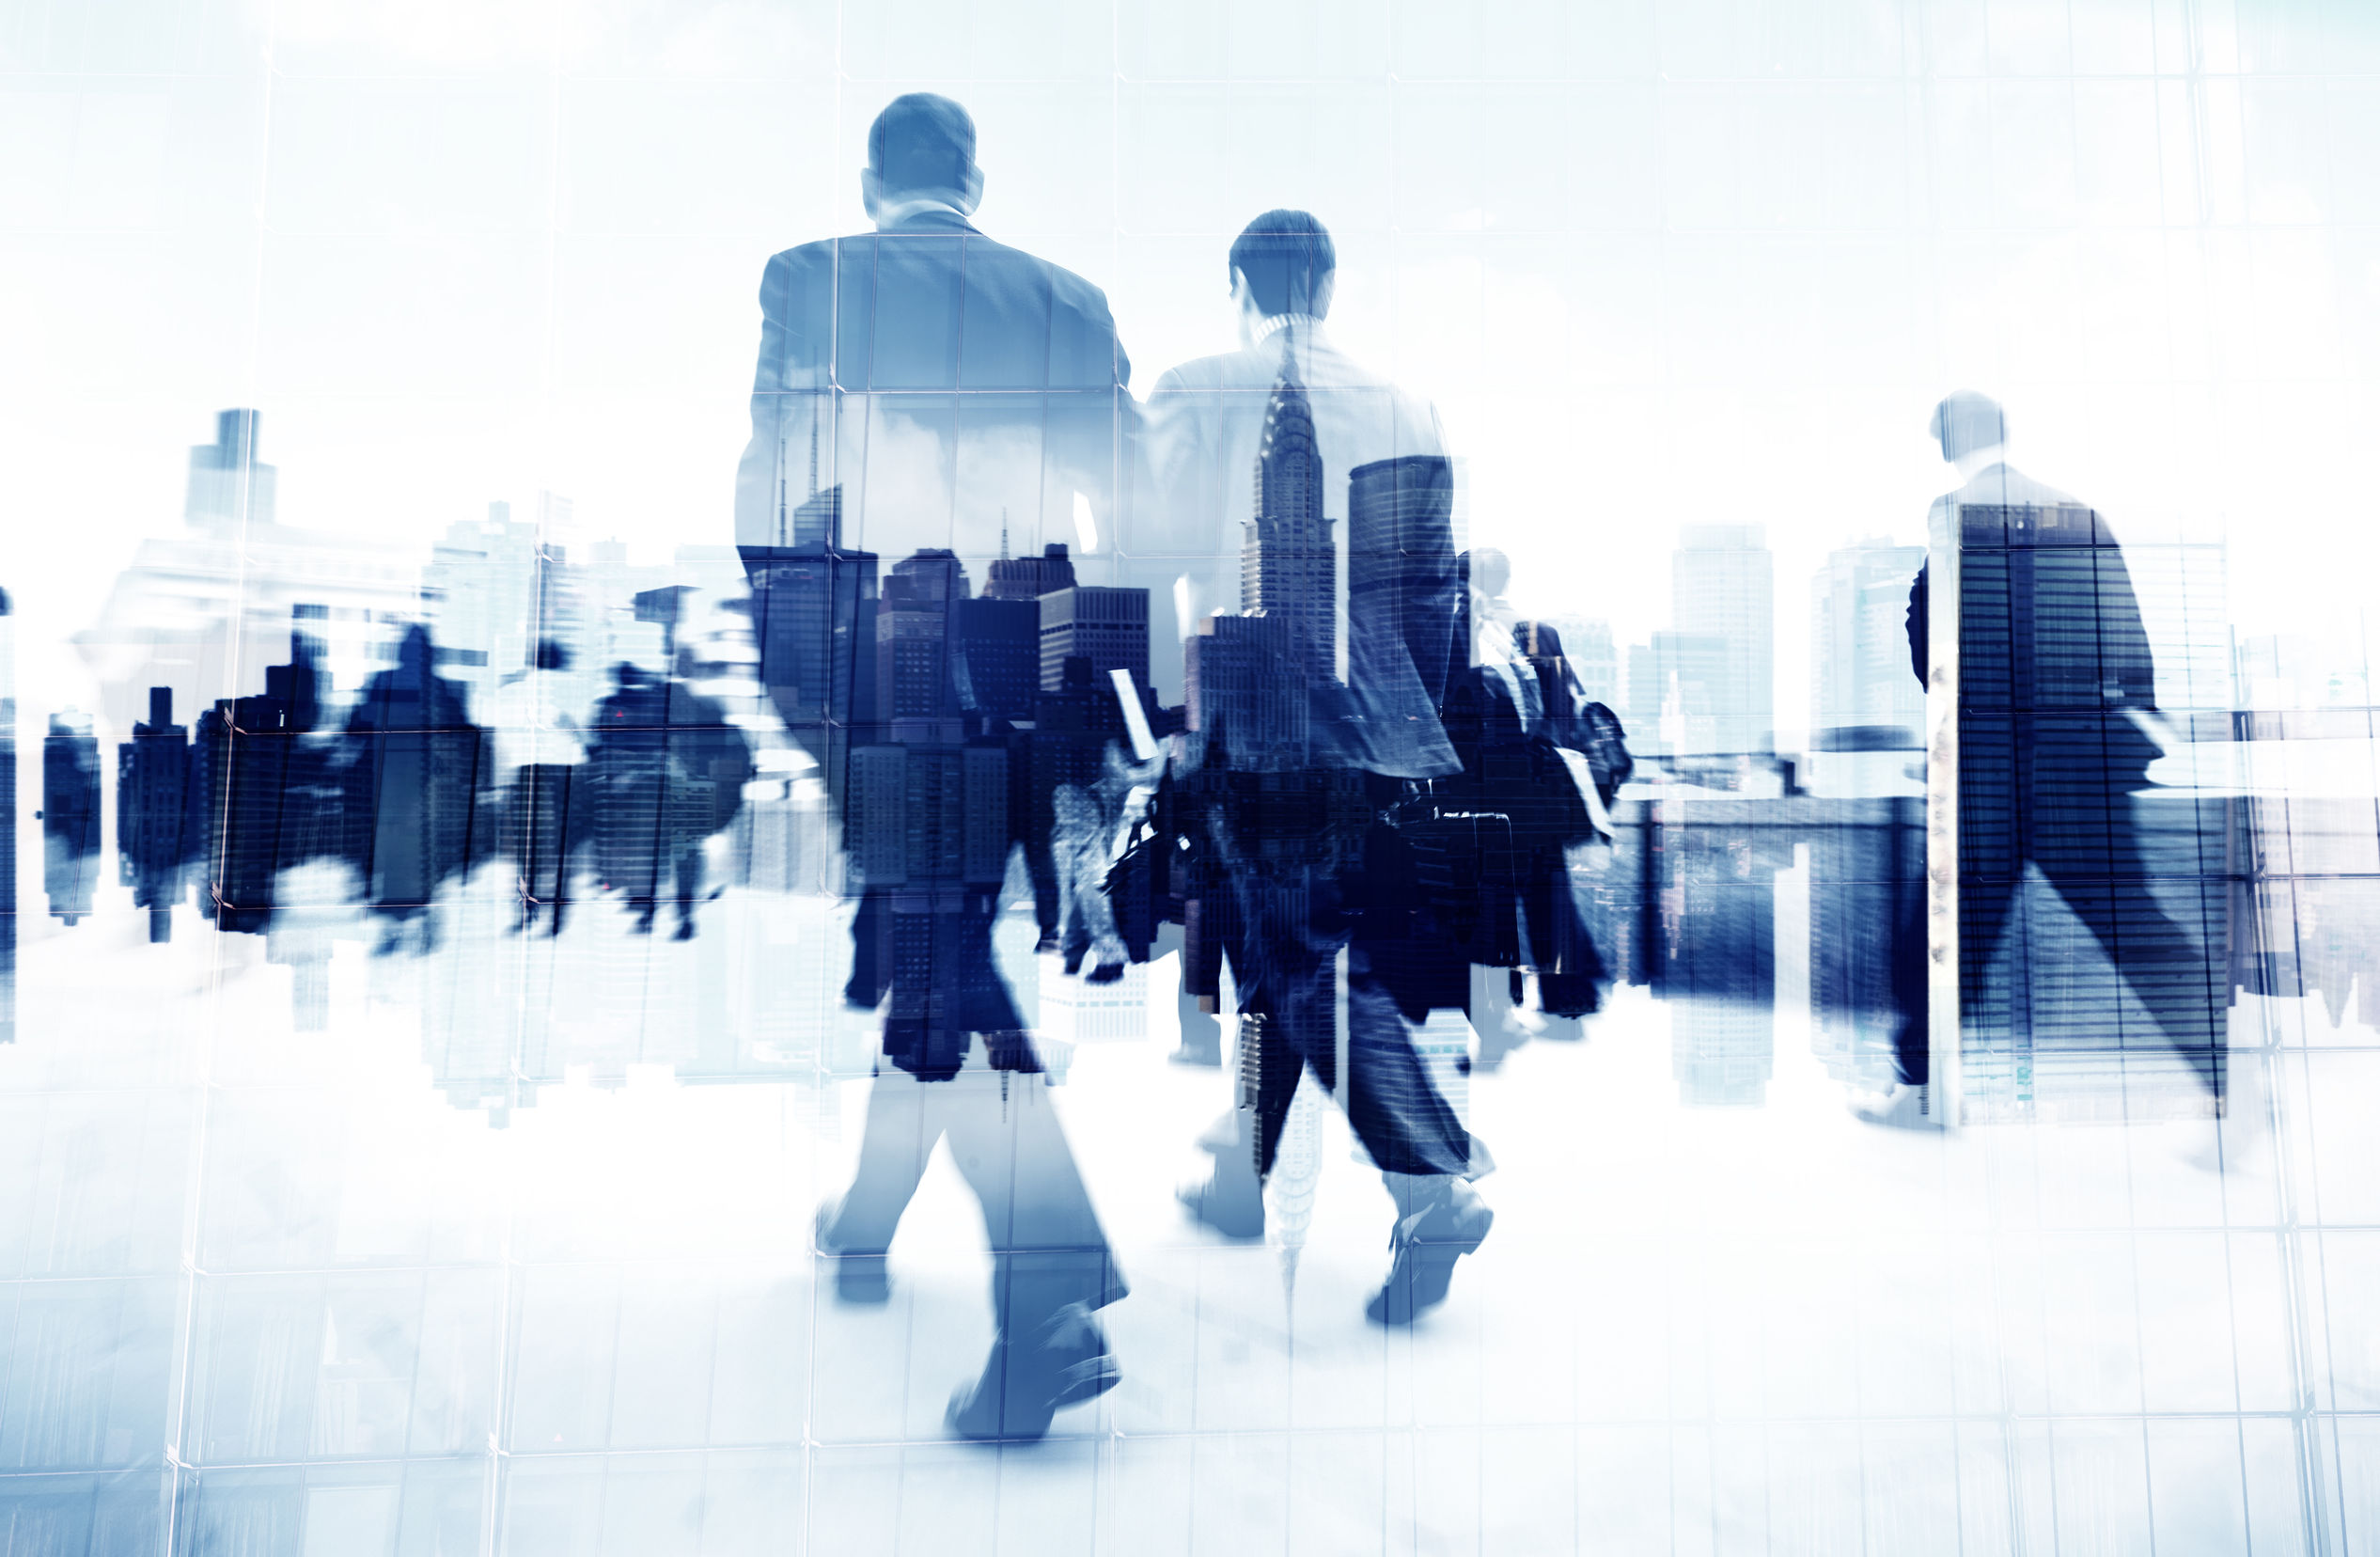 Abstract image of business people walking away against skyscraper sky